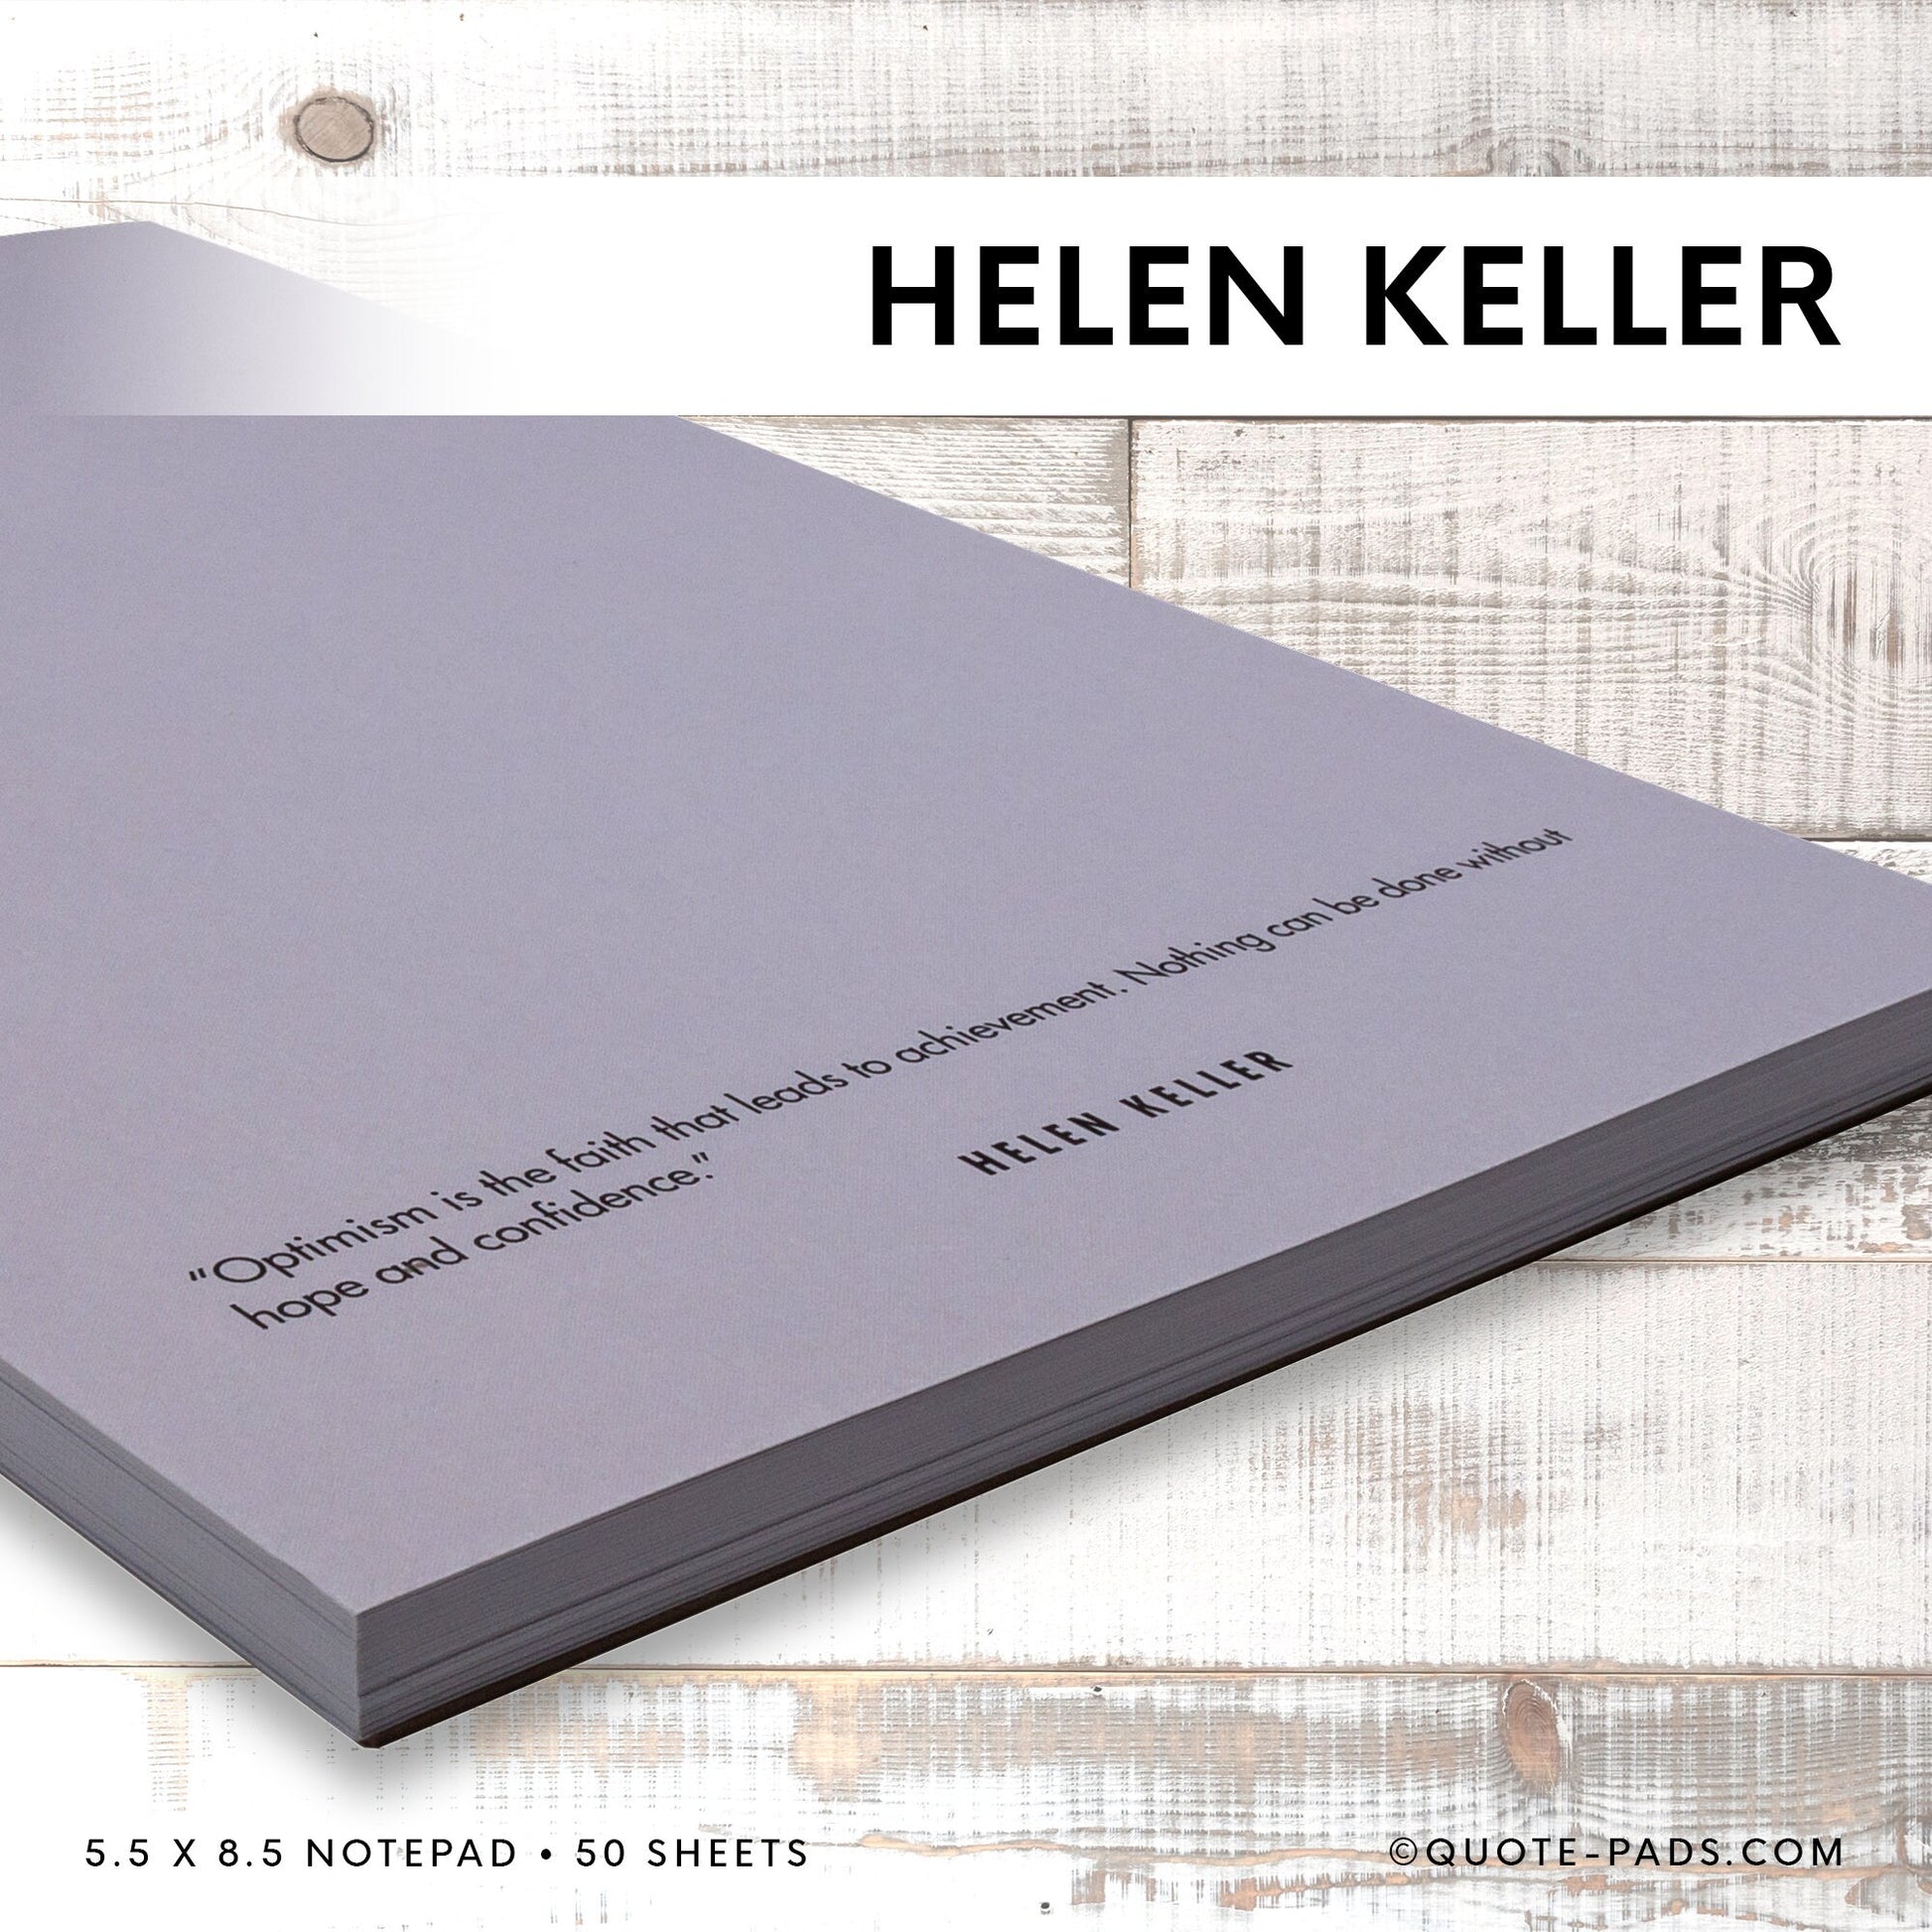 50 Helen Keller Quotes Notepad  |  5.5 x 8.5 Notepad | 50 Sheets - Quote-Pads